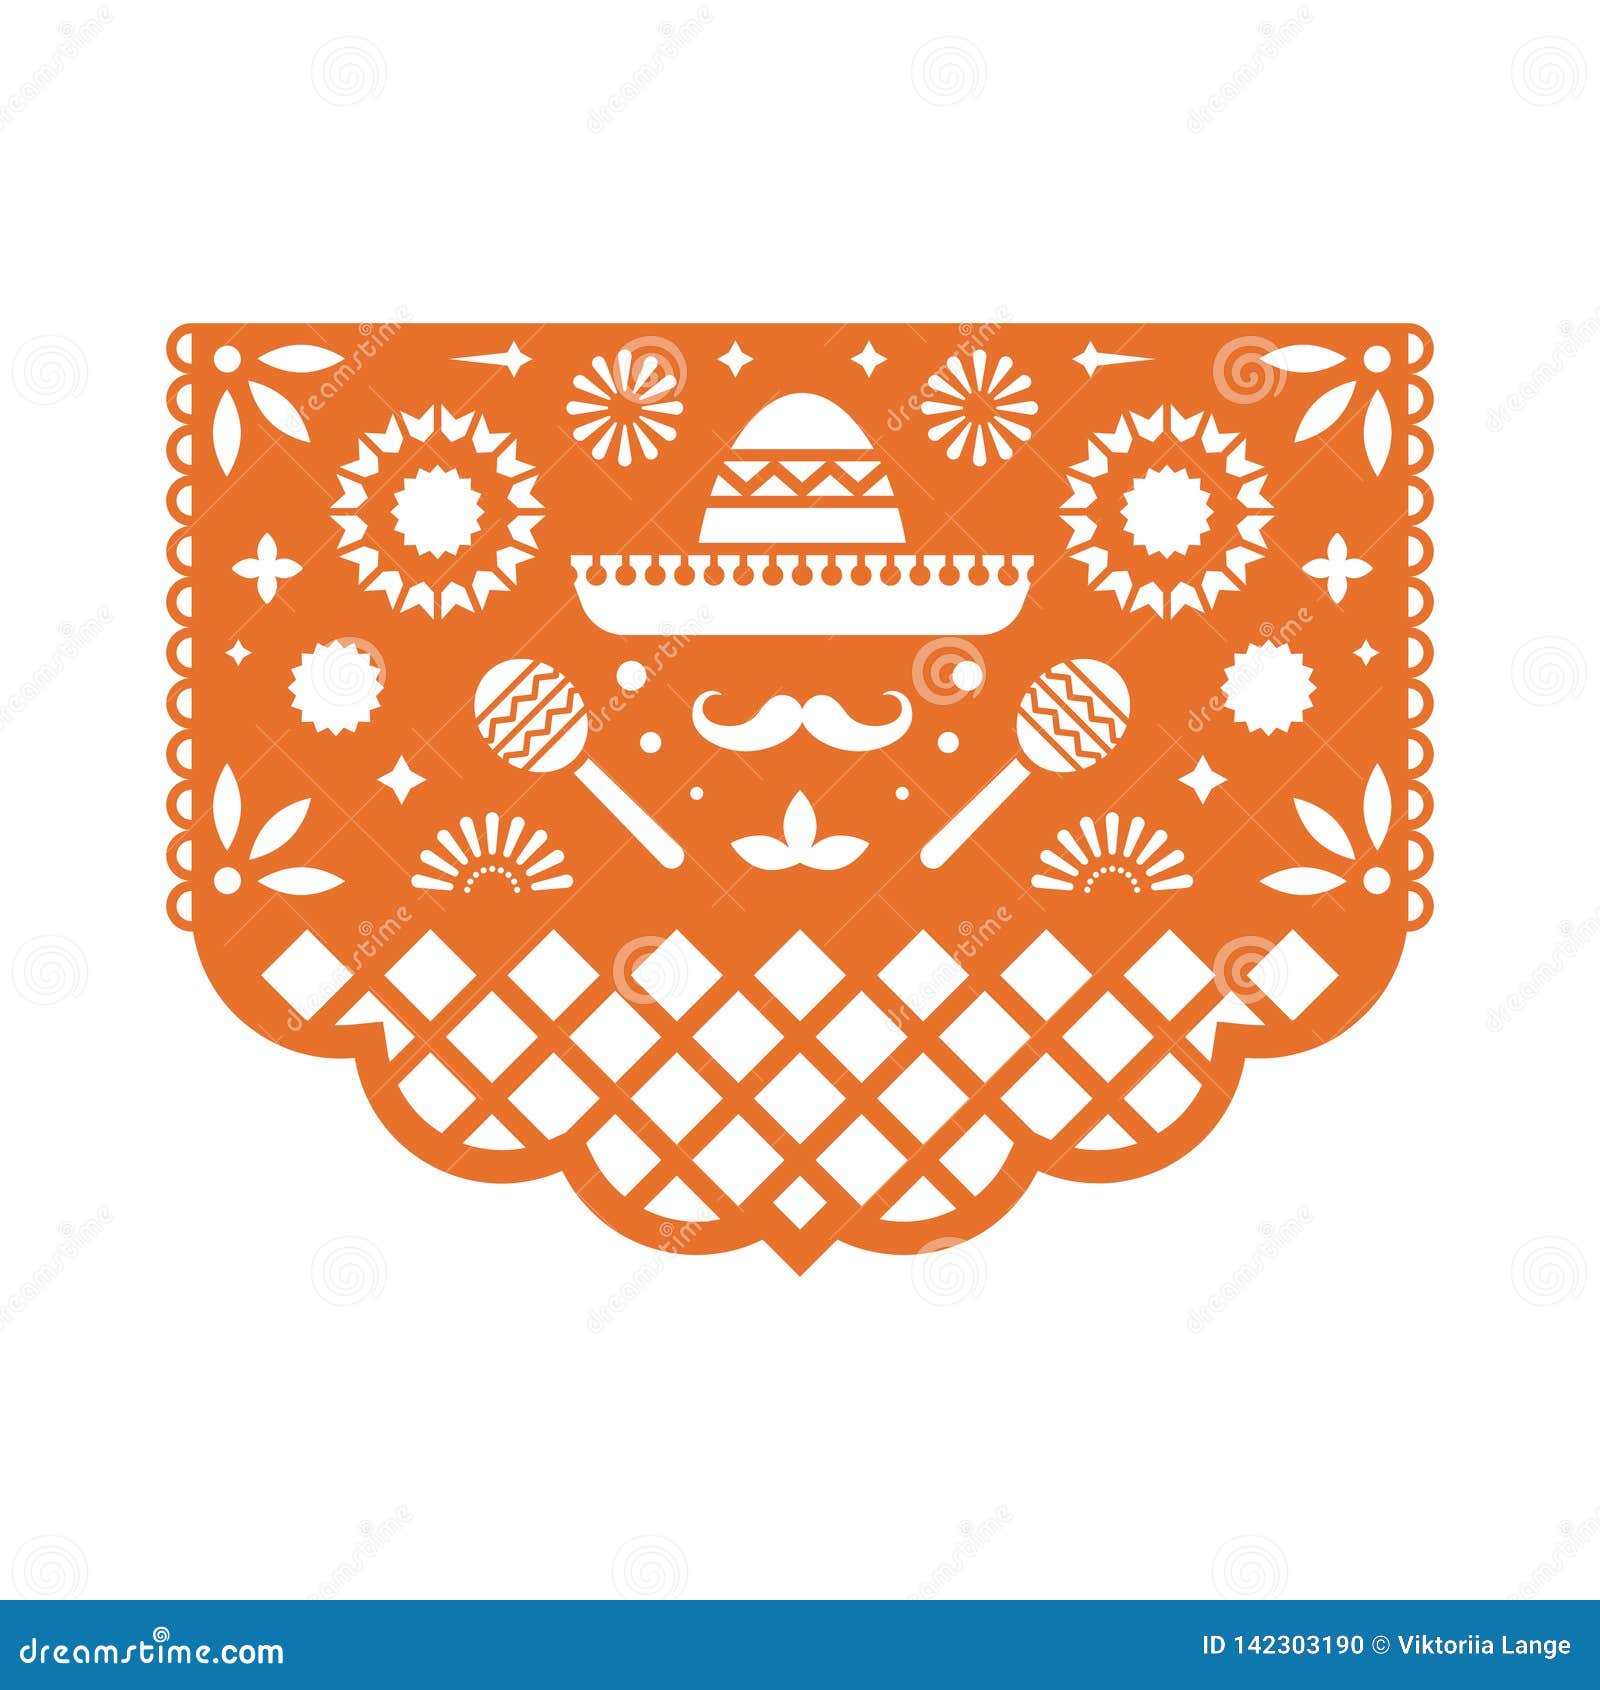  papel picado greeting card with floral pattern.